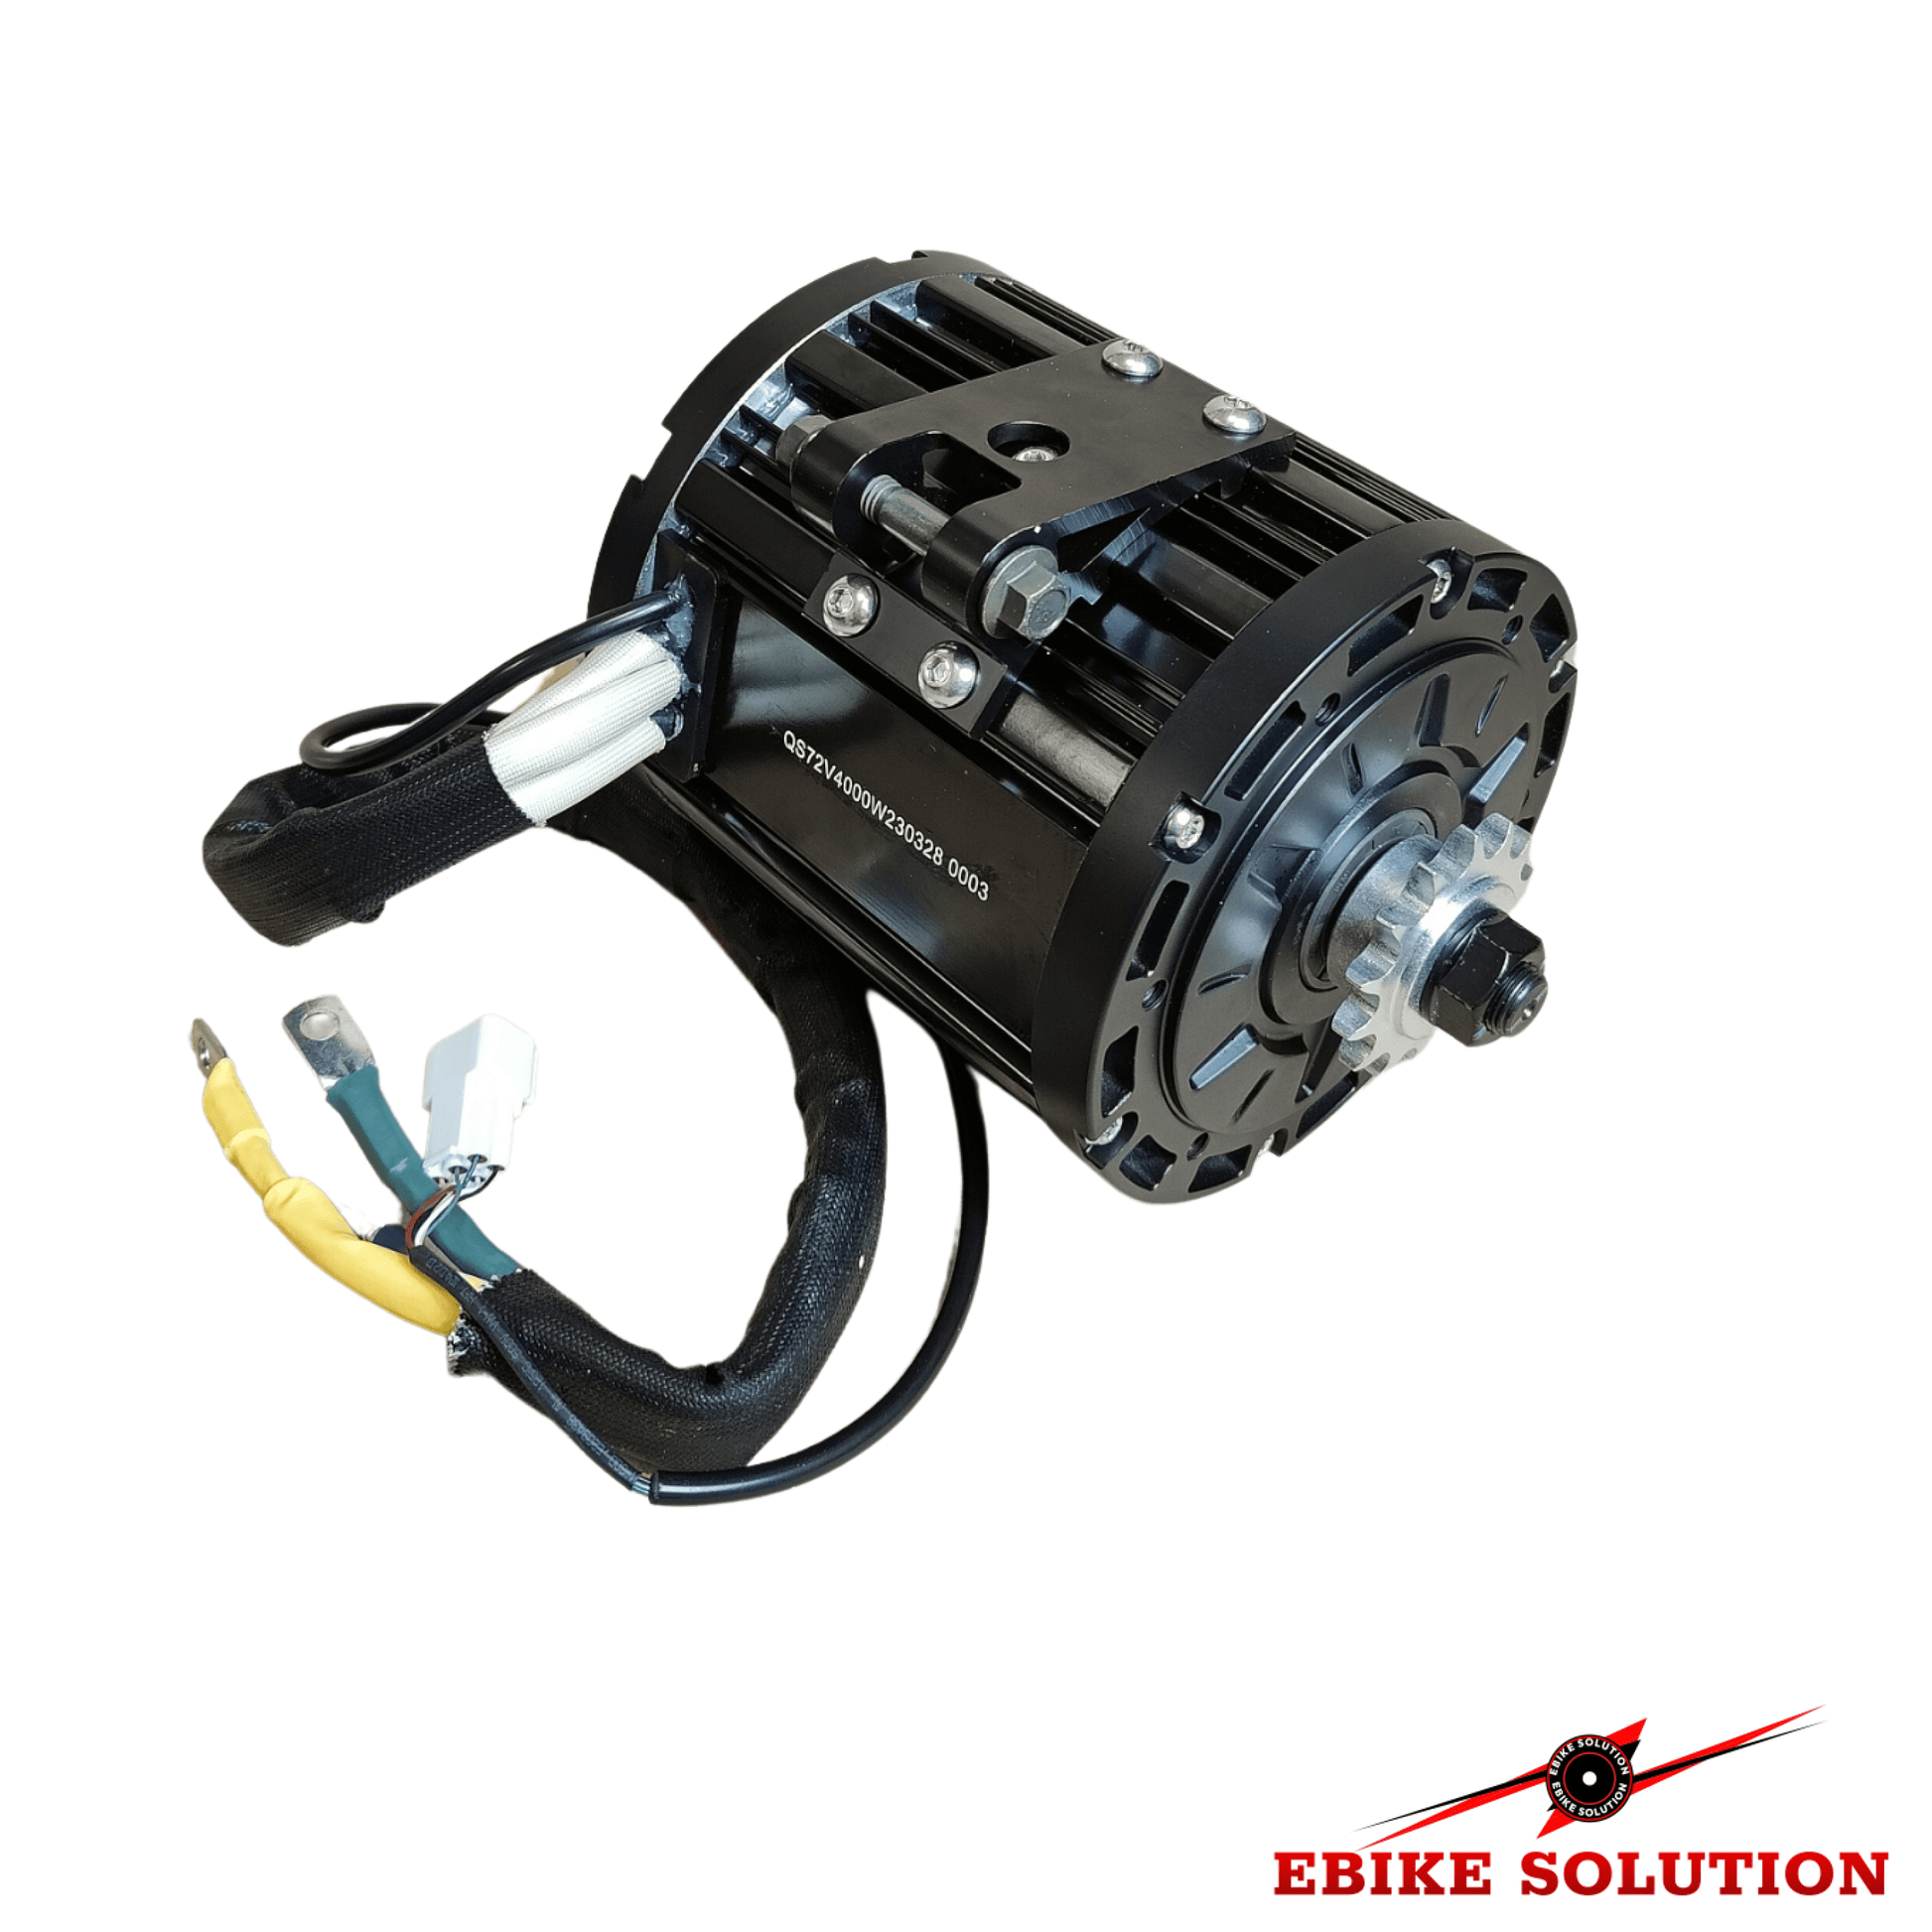 QSMOTOR 138 4000W Air Cooled Mid Drive Motor With Spline Shaft